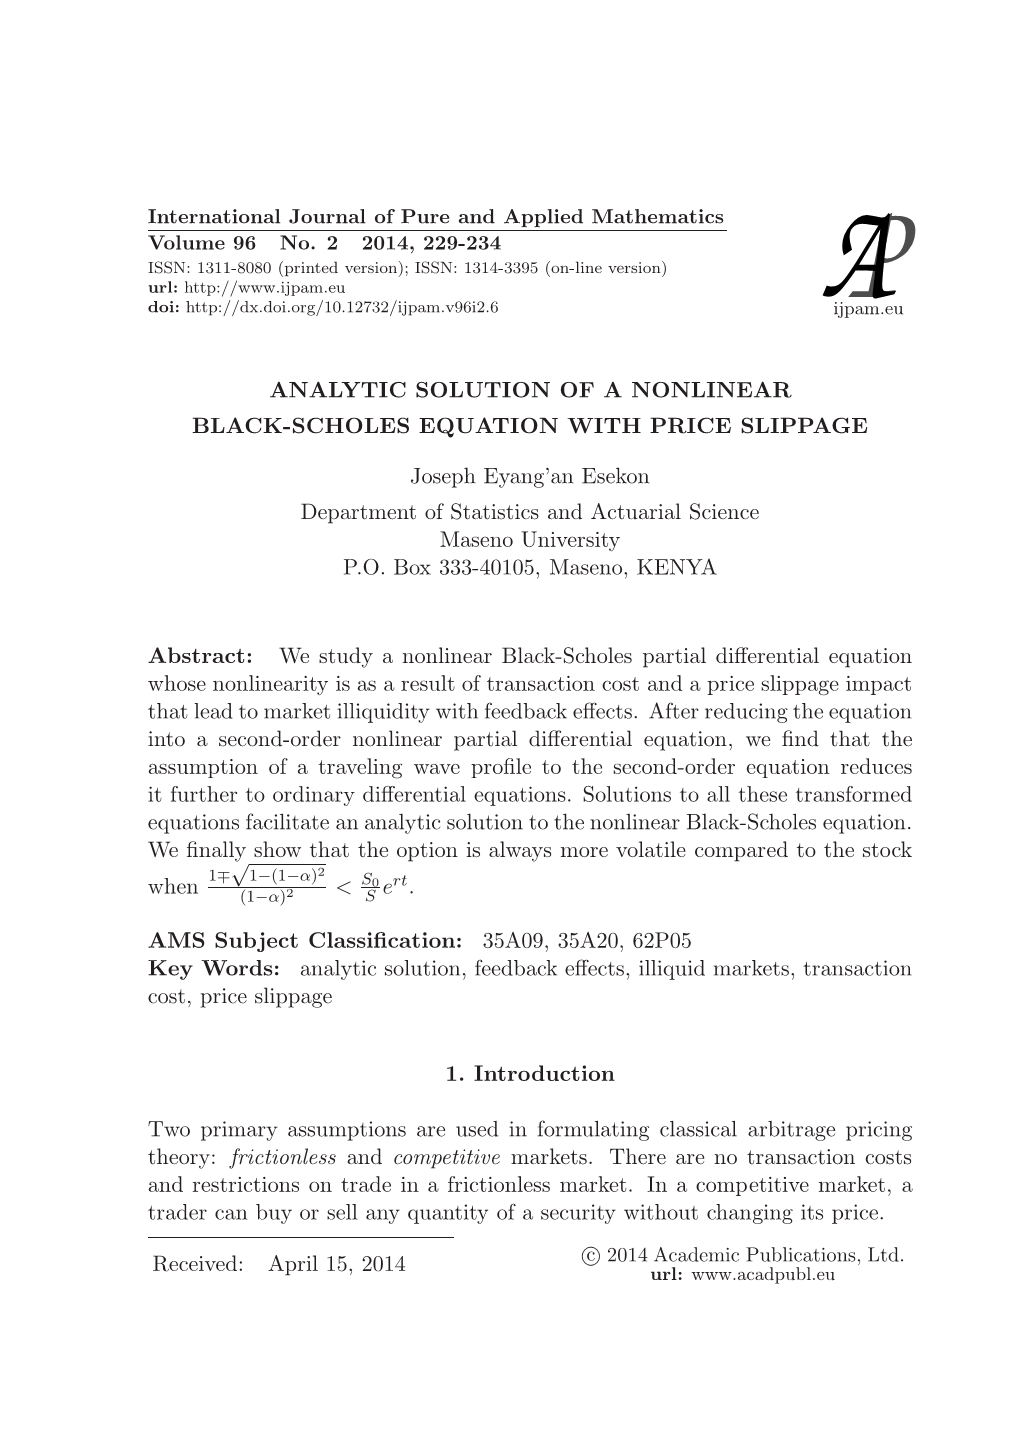 Analytic Solution of a Nonlinear Black-Scholes Equation with Price Slippage